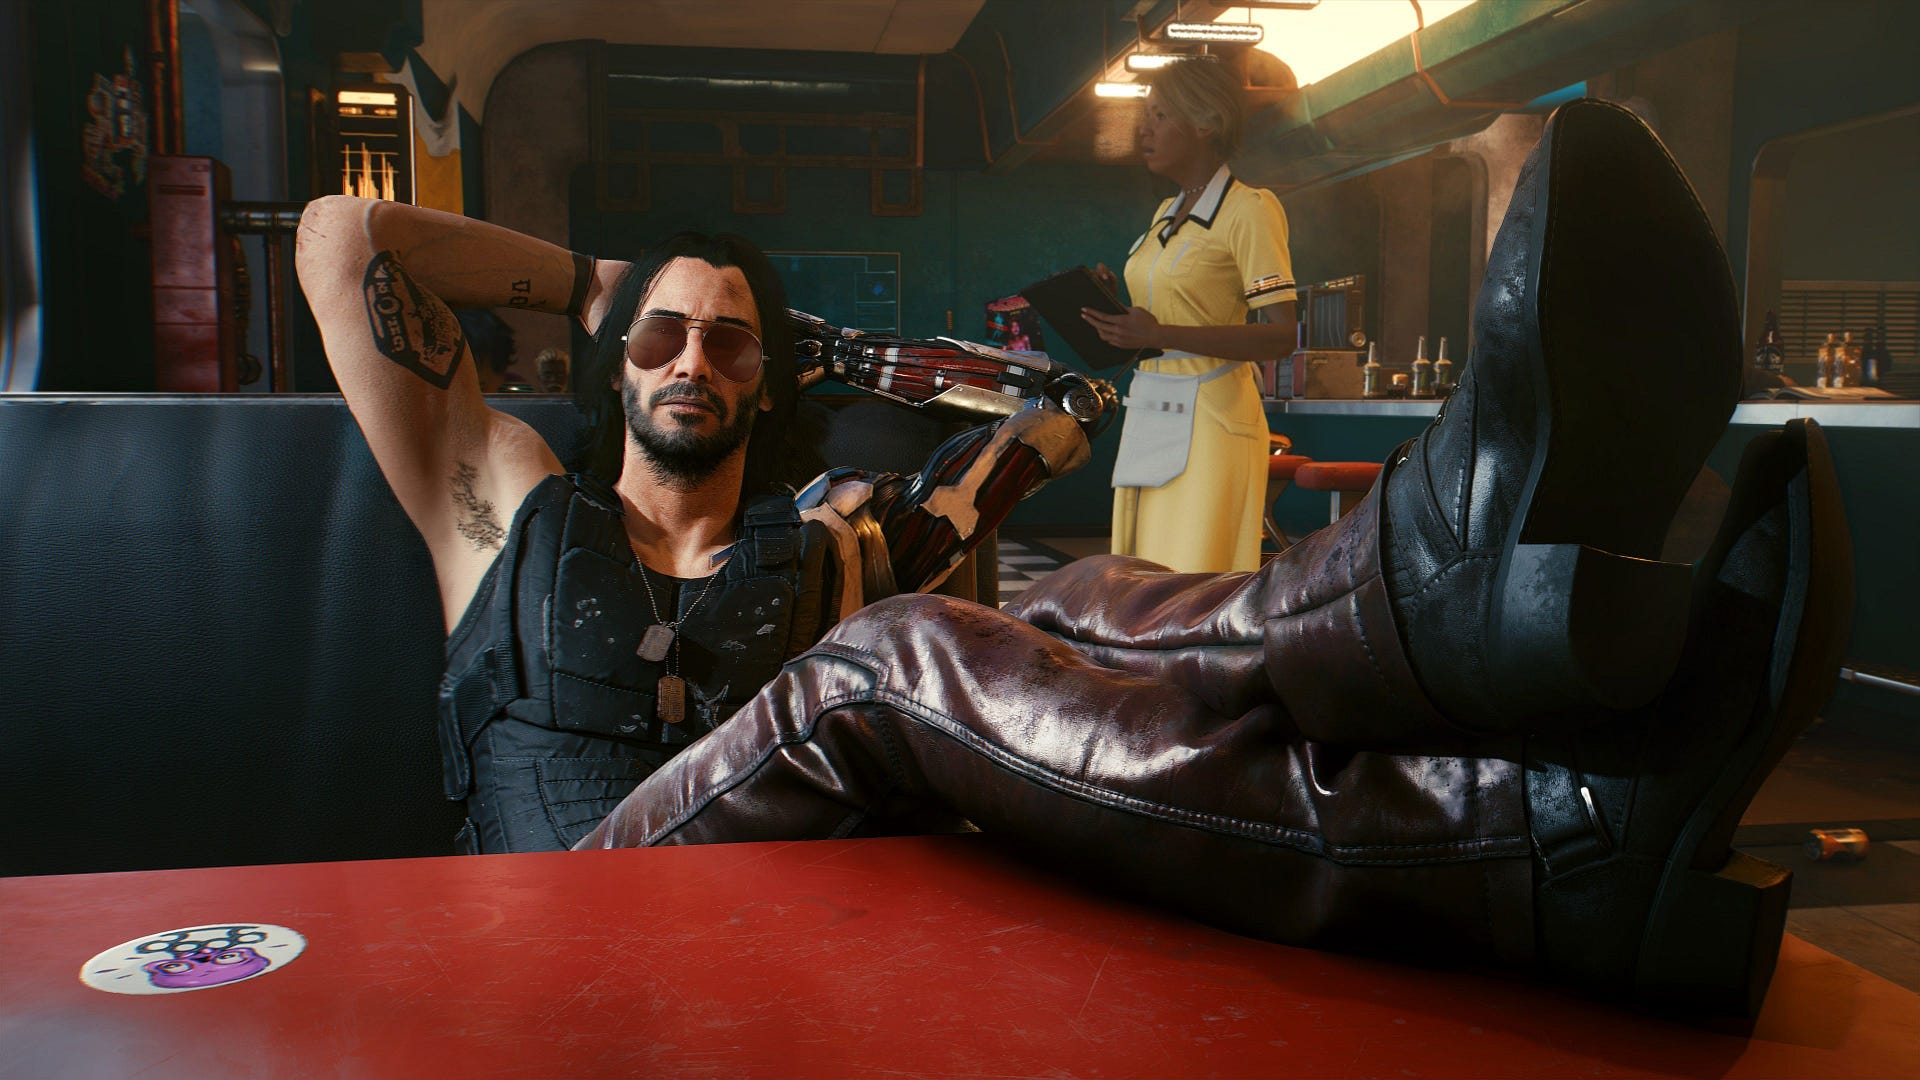 Cyberpunk 2077 2.0 adds a touch of Doom with a new secret arcade game